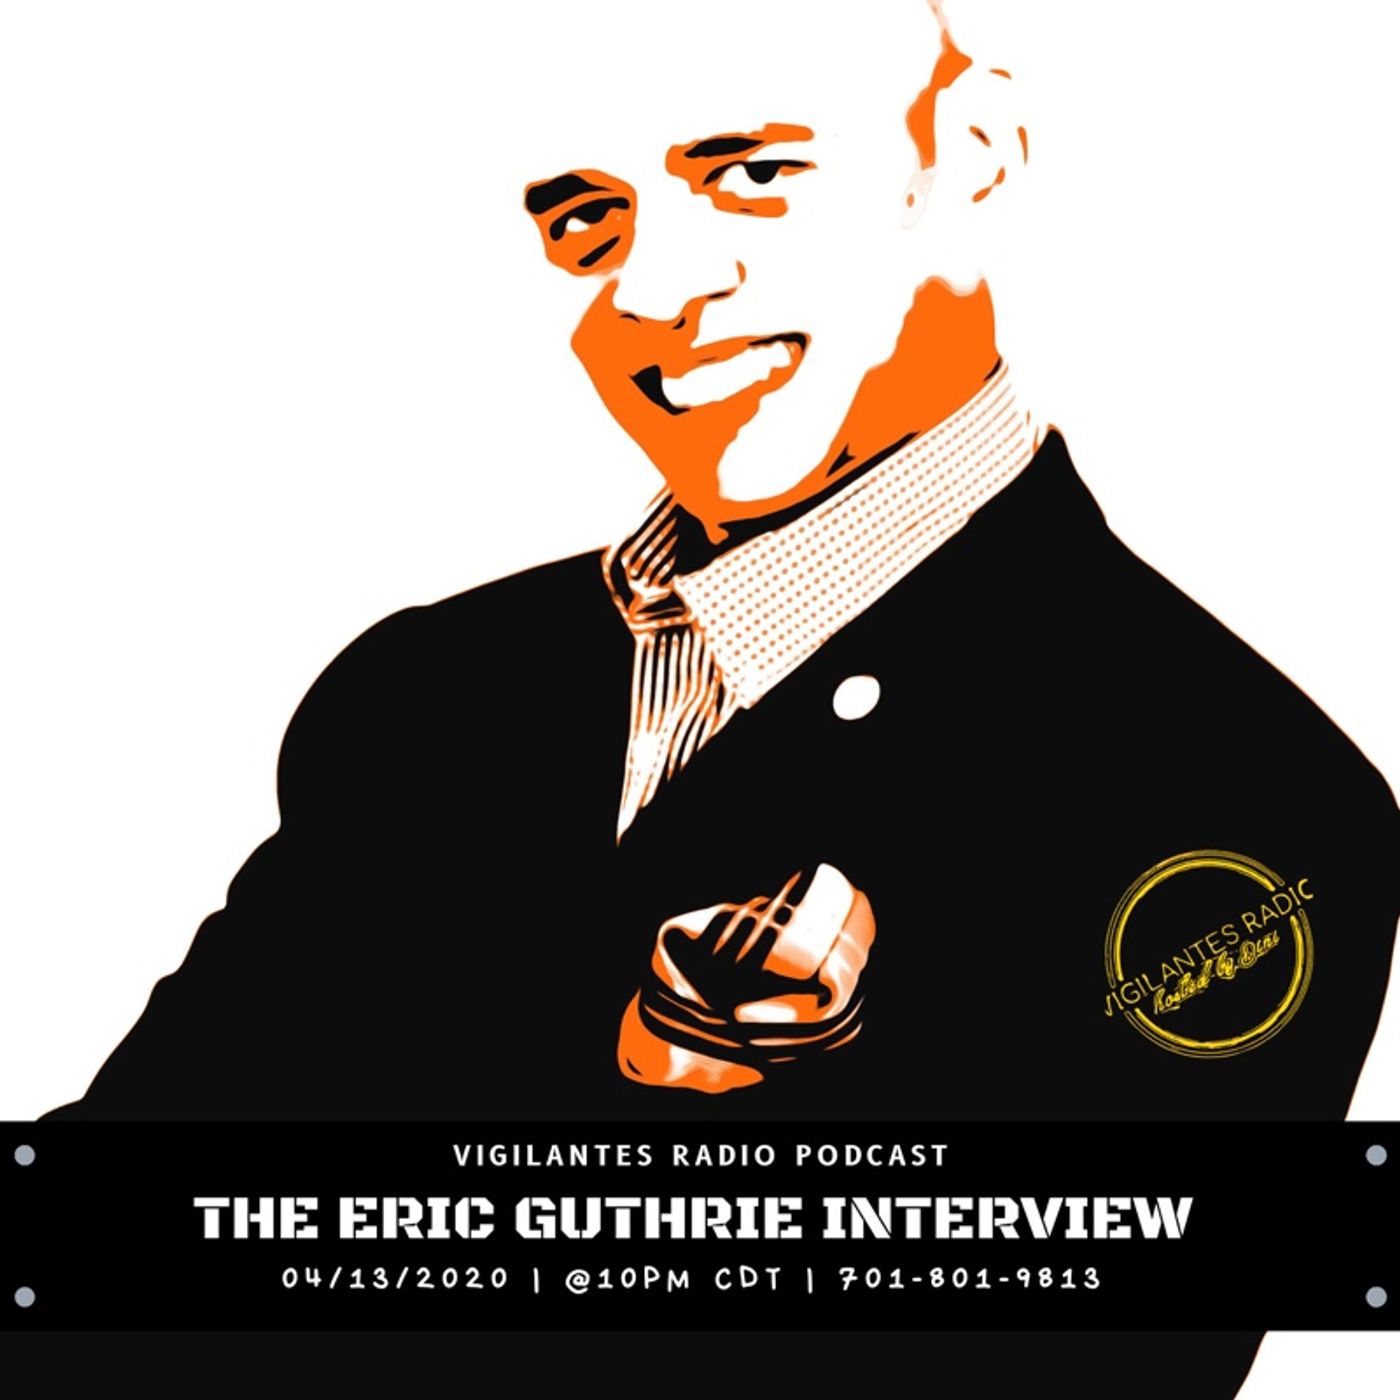 The Eric Guthrie Interview. Image